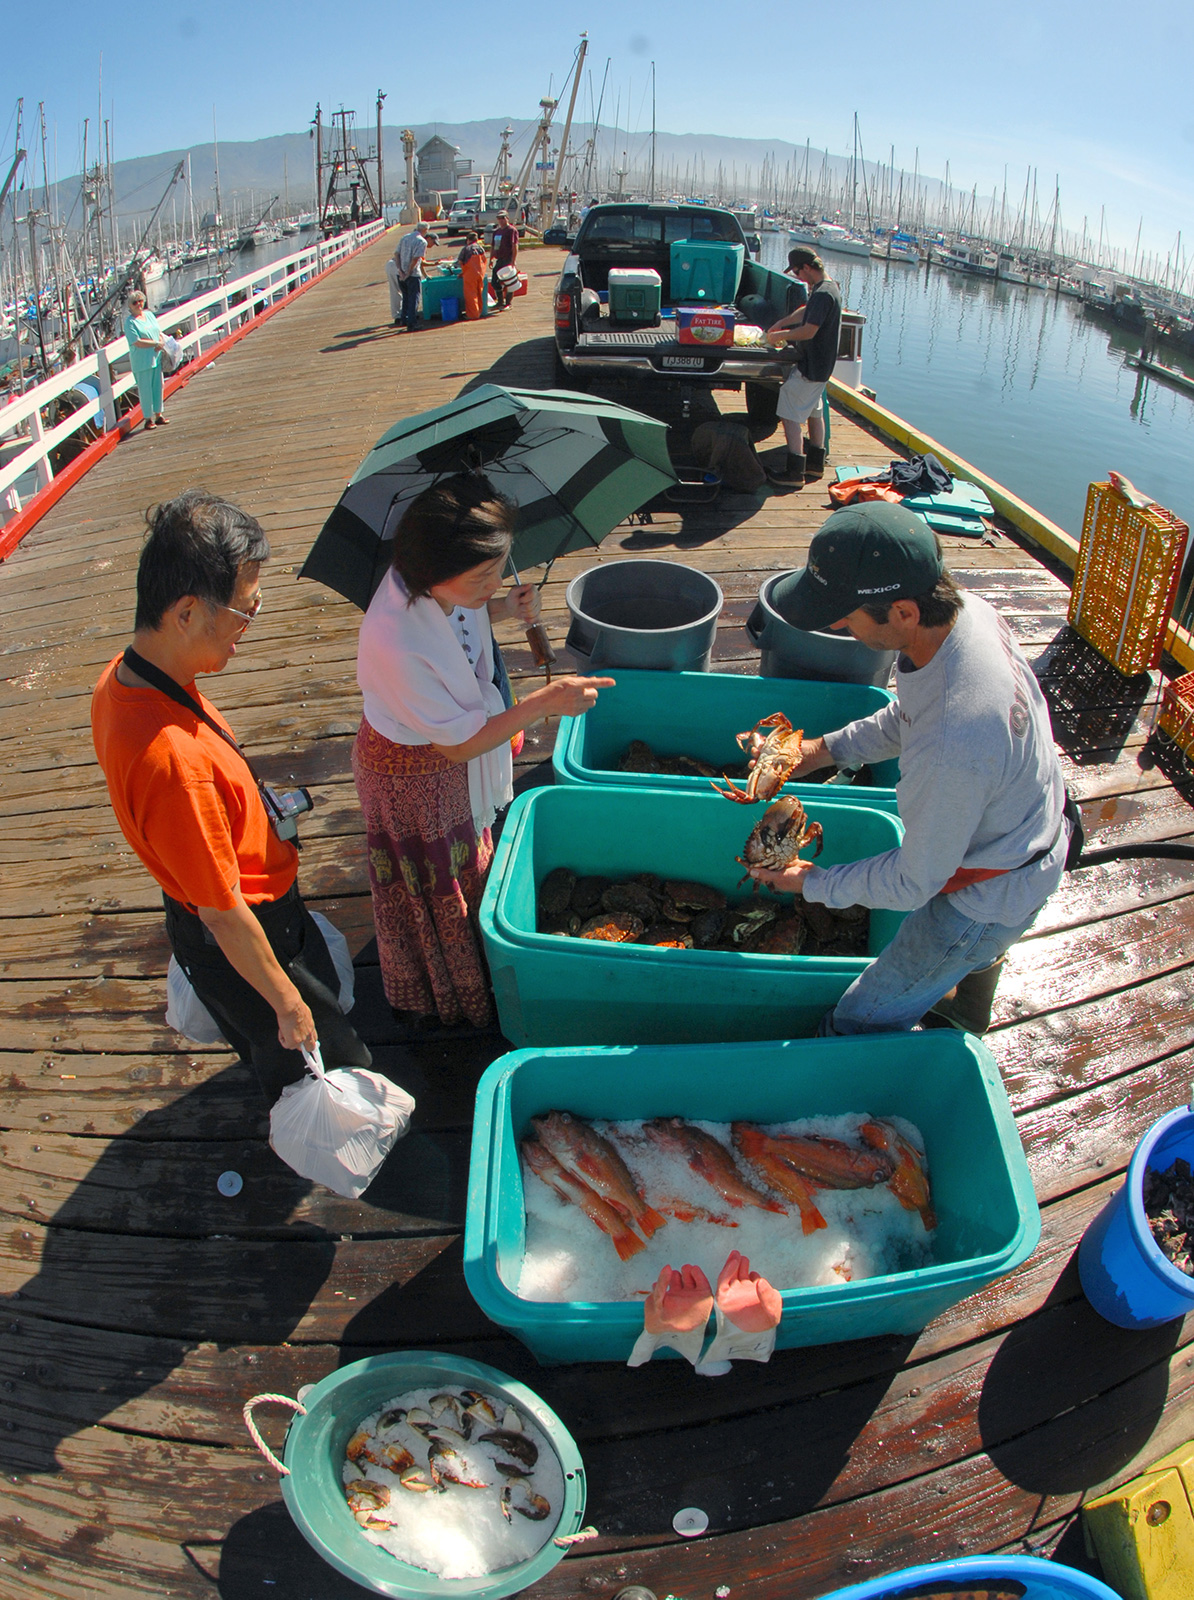 What's Up with the Santa Barbara Fisherman's Market? - The ...